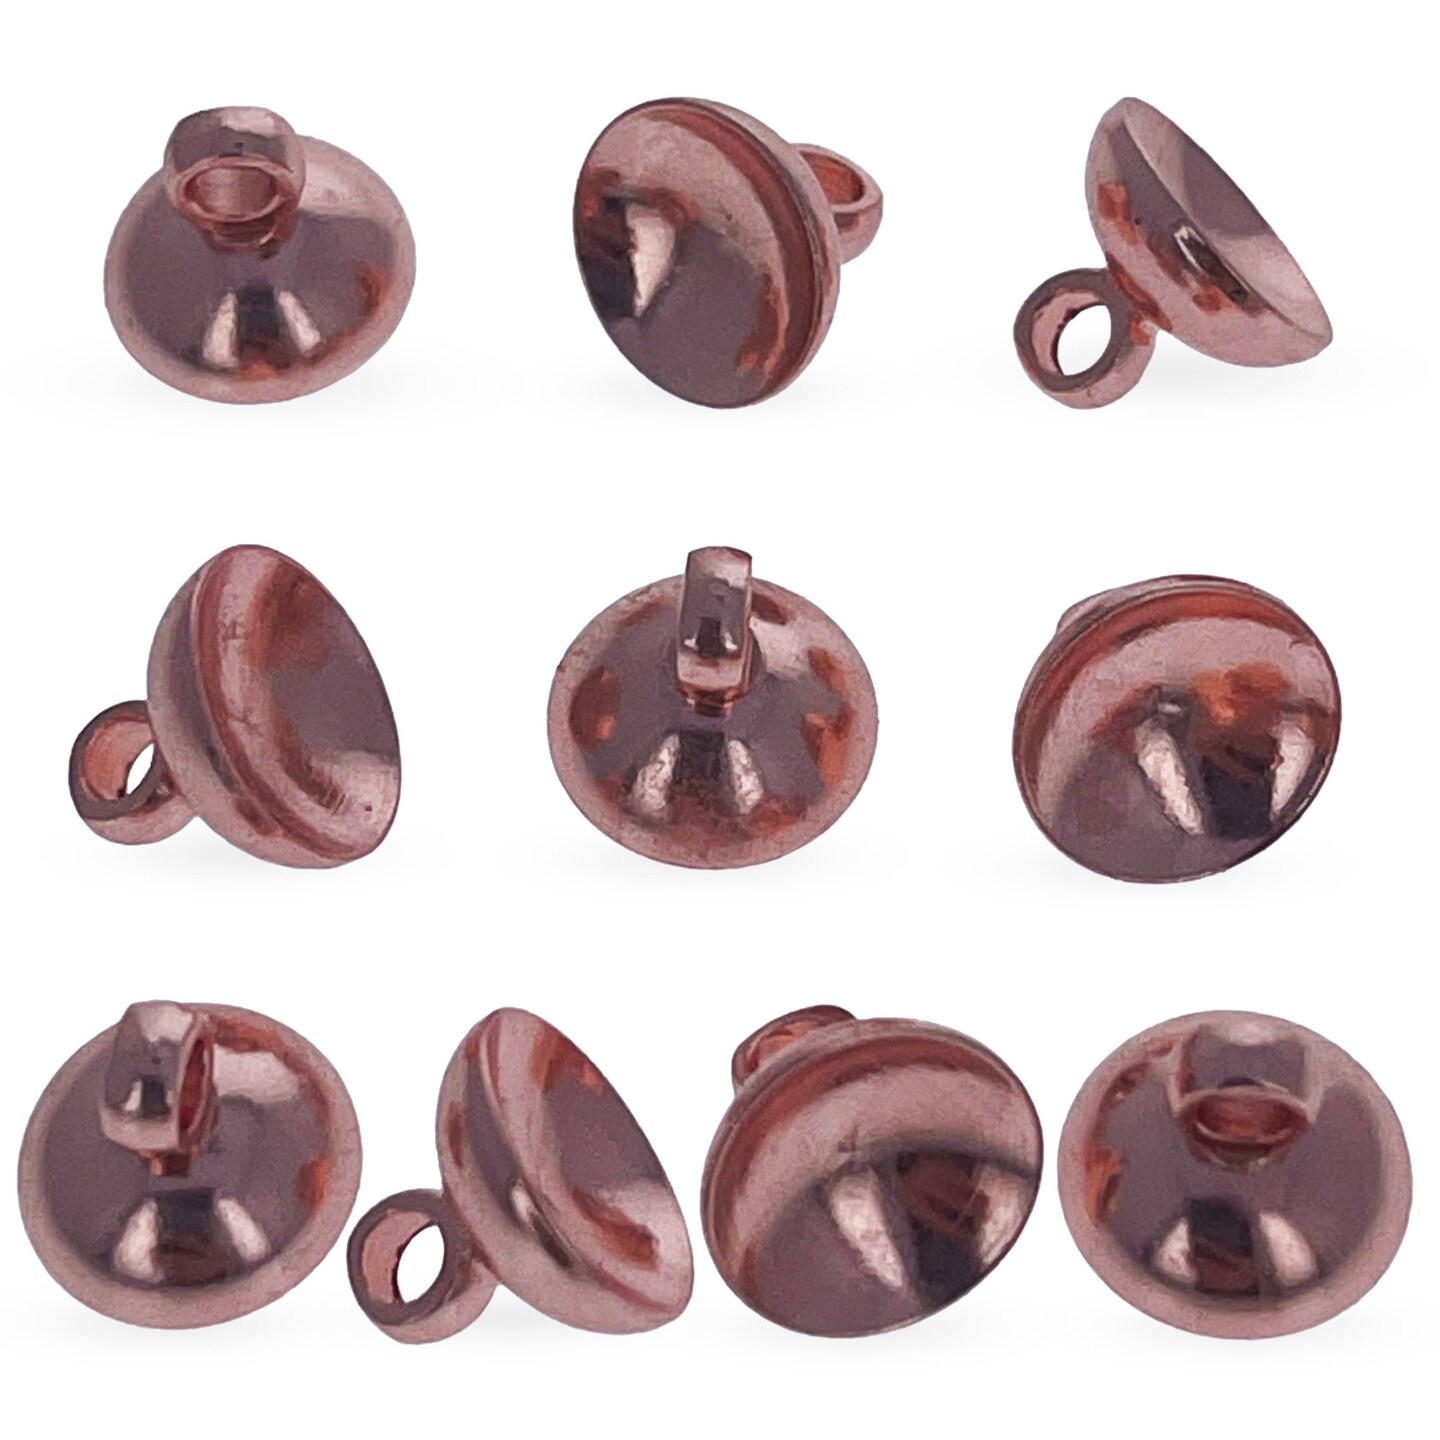 10 Rose Gold Tone Metal Ornament Caps - Egg Top Findings, End Caps 0.32 Inches